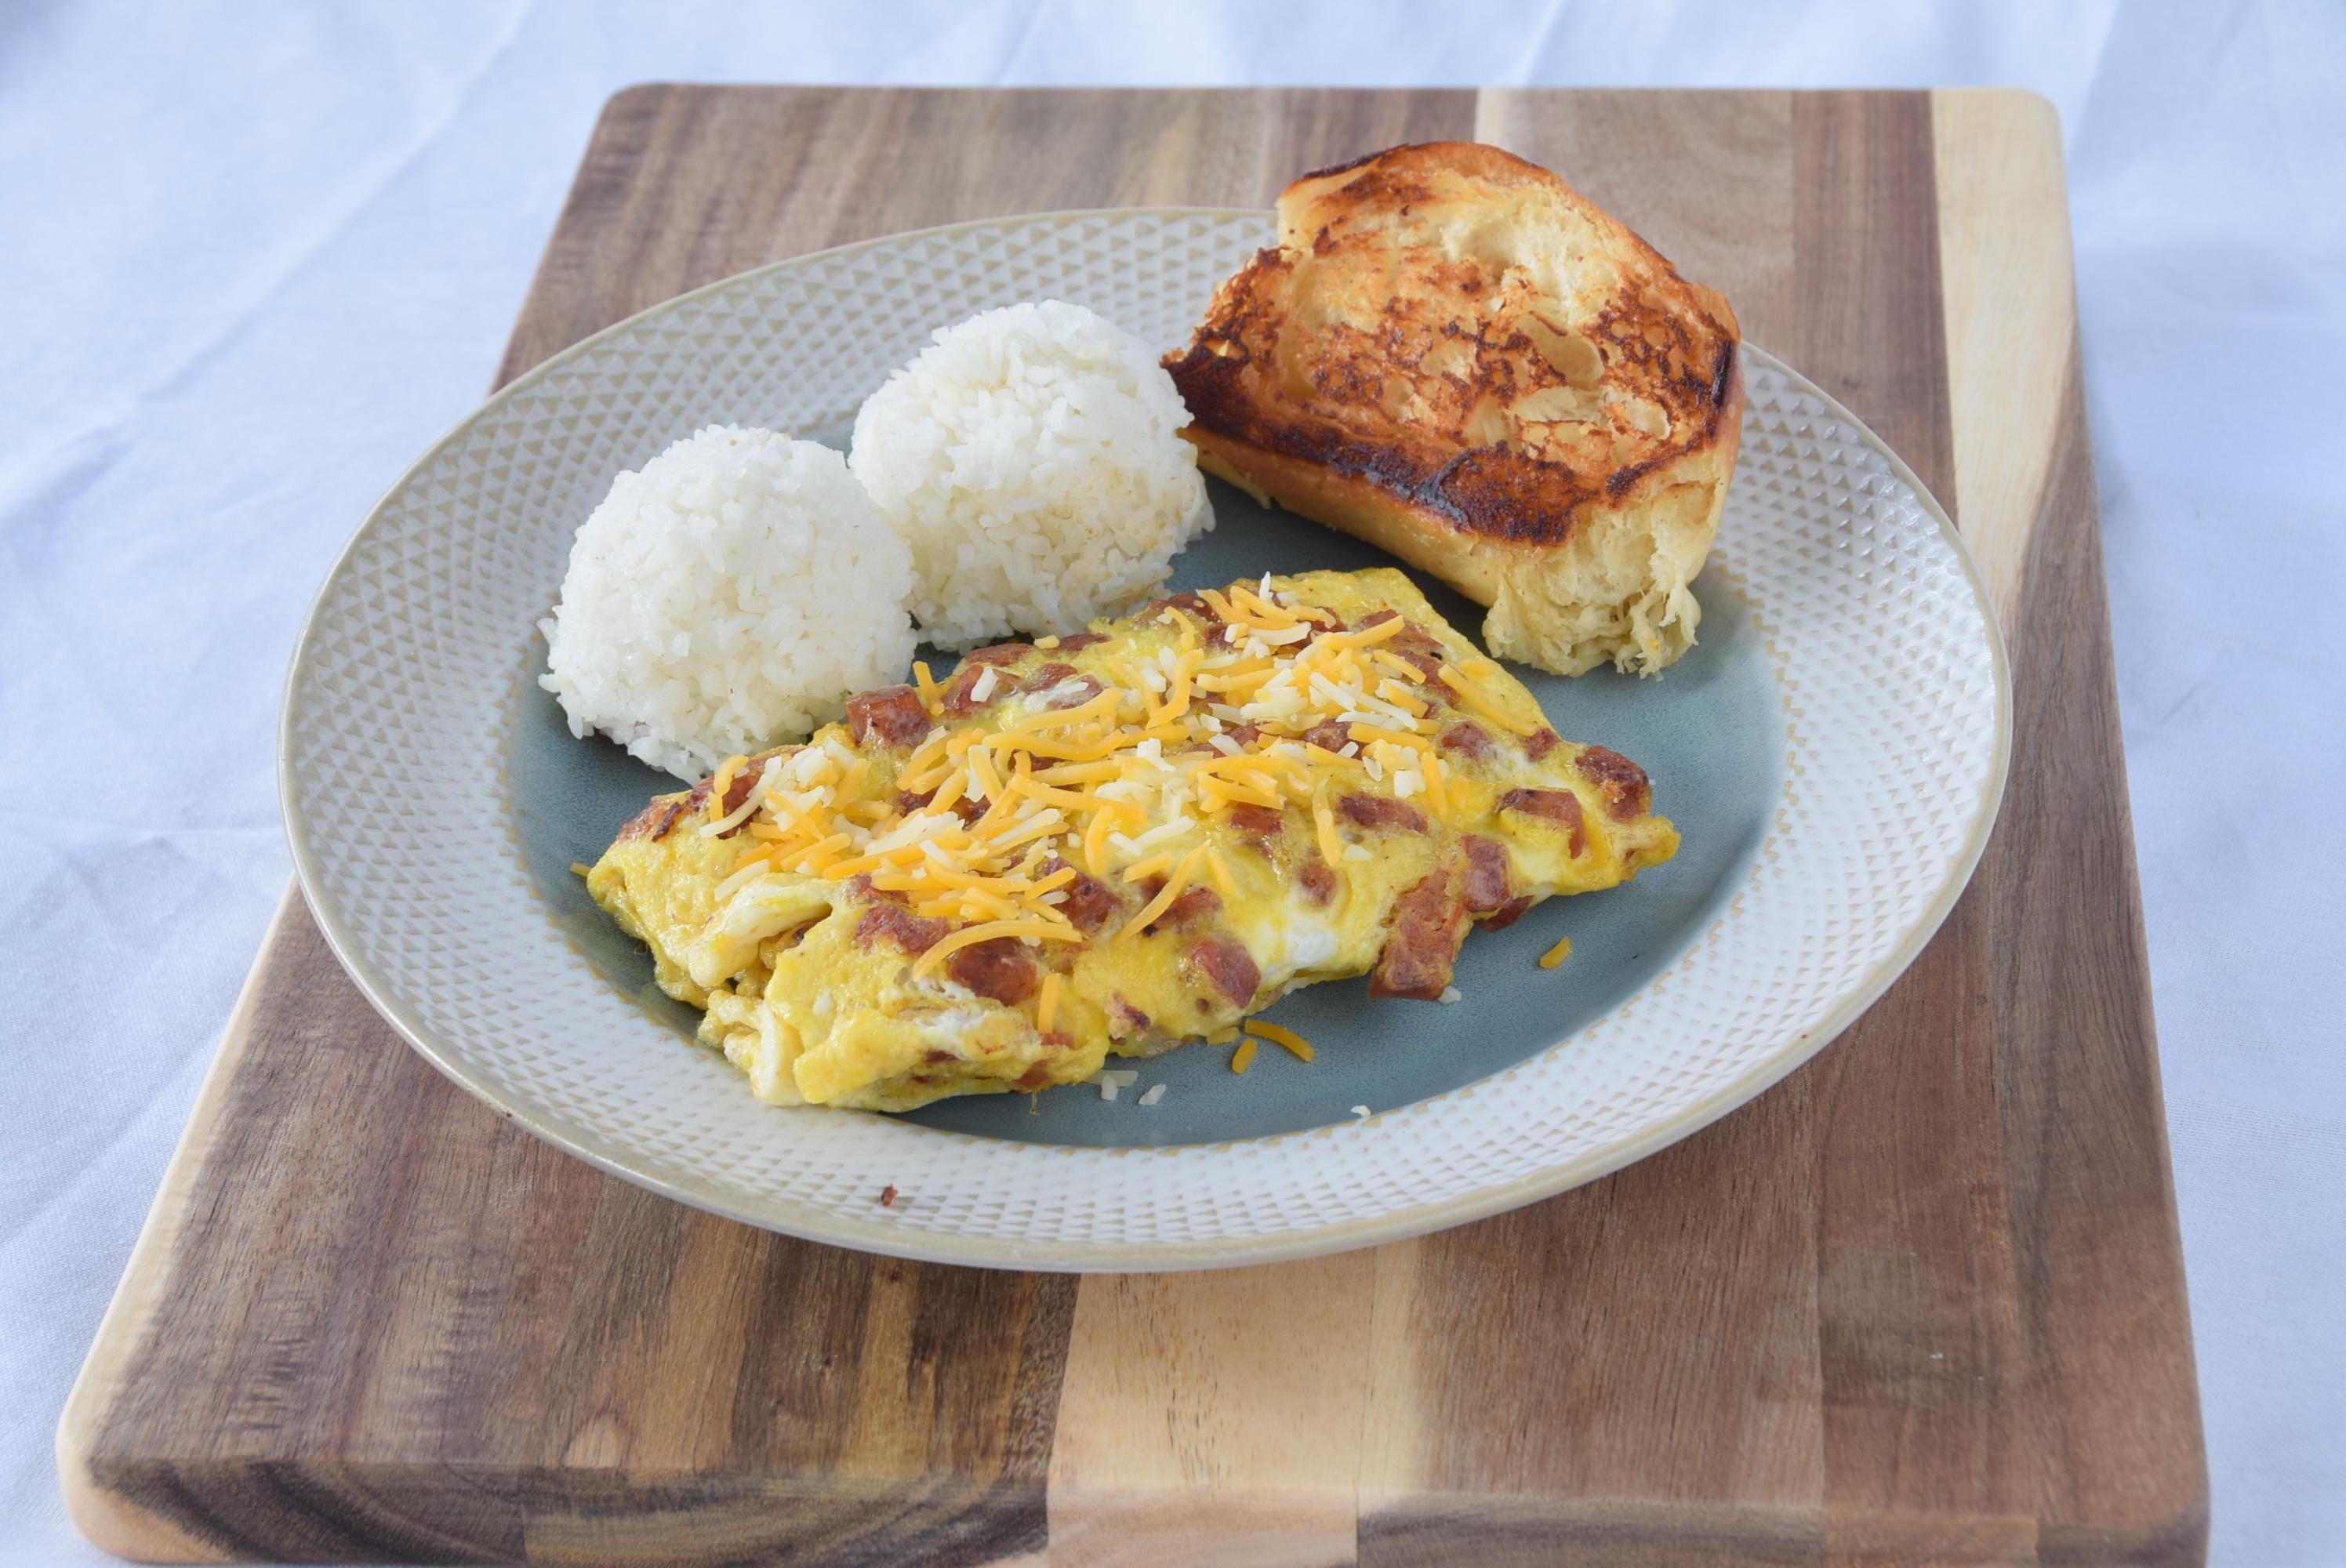 Portuguese Sausage Omelet